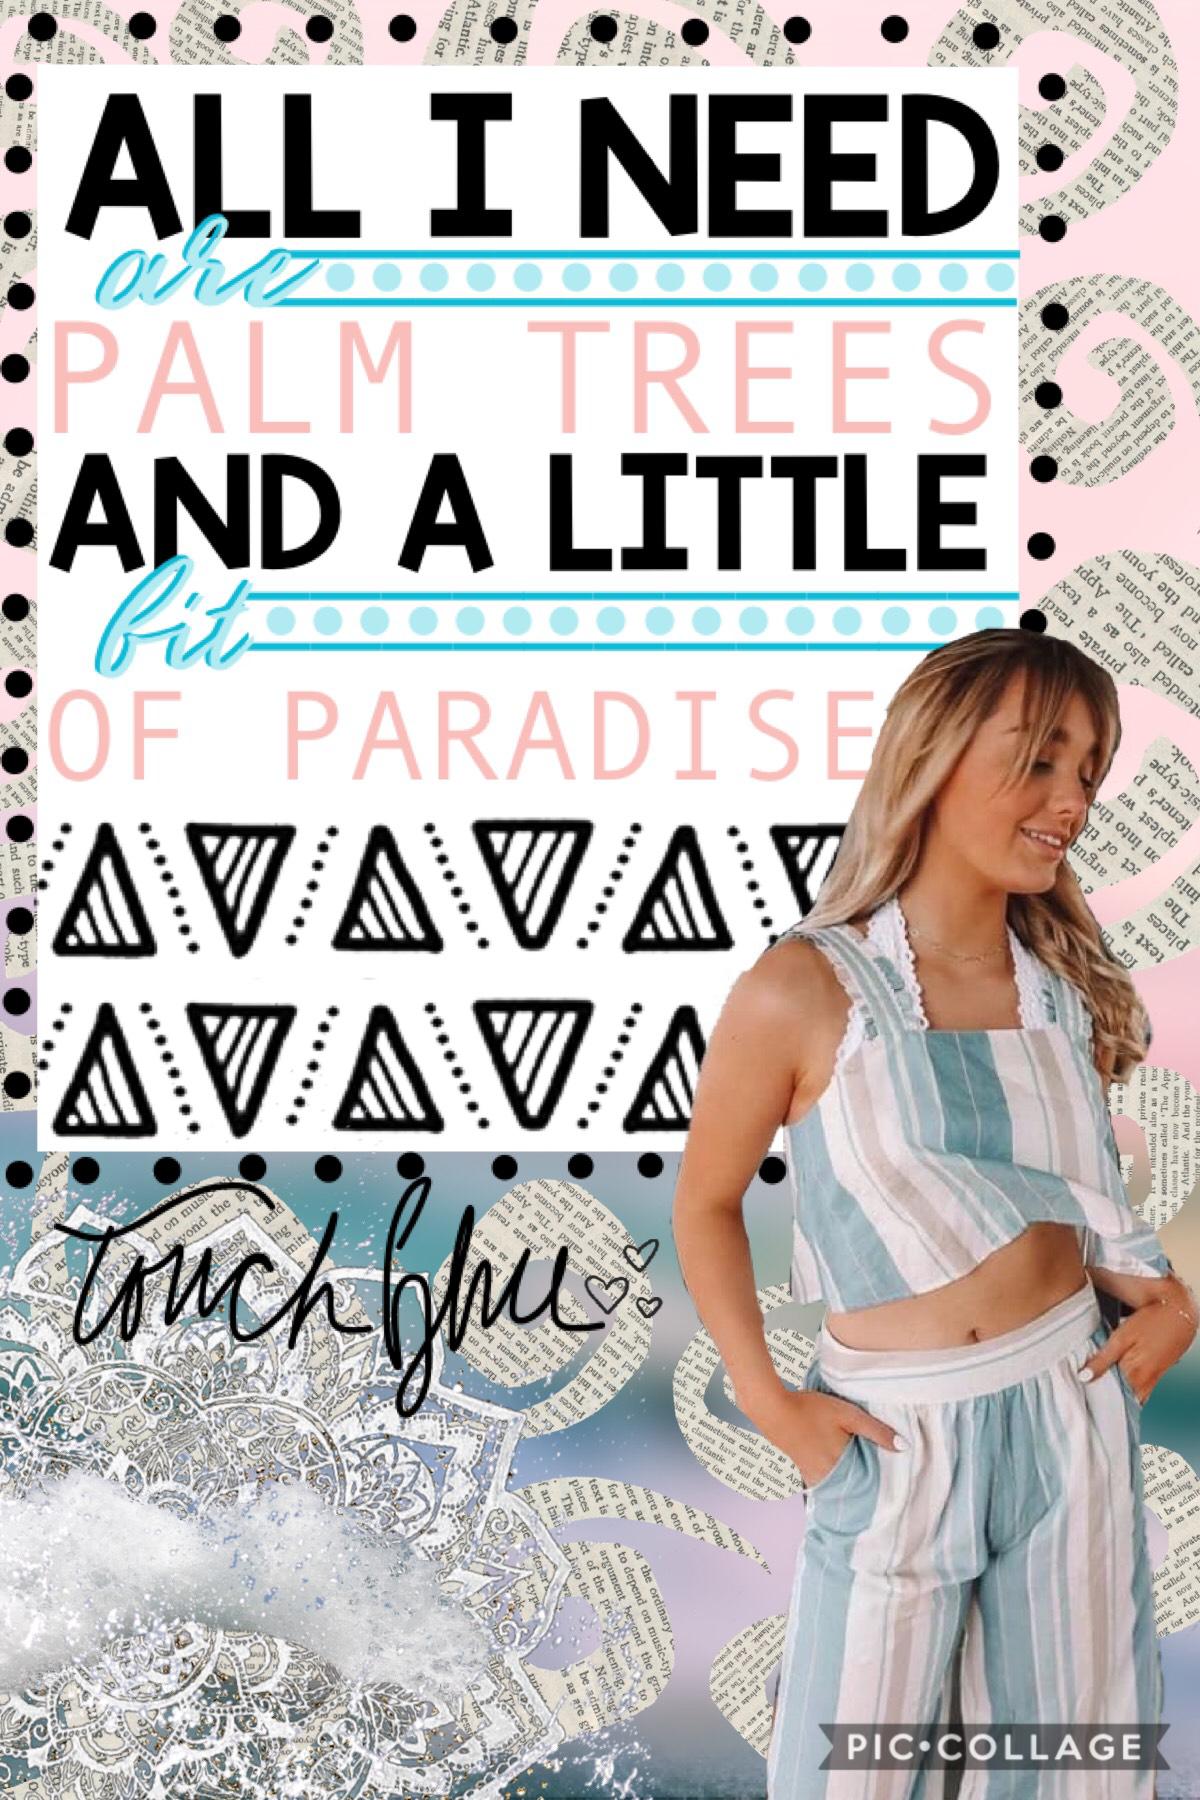 🌴 tap 🌴
I’m back with an old theme!!! Do you guys like it? Rate 1-10. 

Qotd- what do you think of the new layout pc did?
Aotd- I’m not a big fan 😂 I’m just so used to the other way that this is hard for me hahahha 